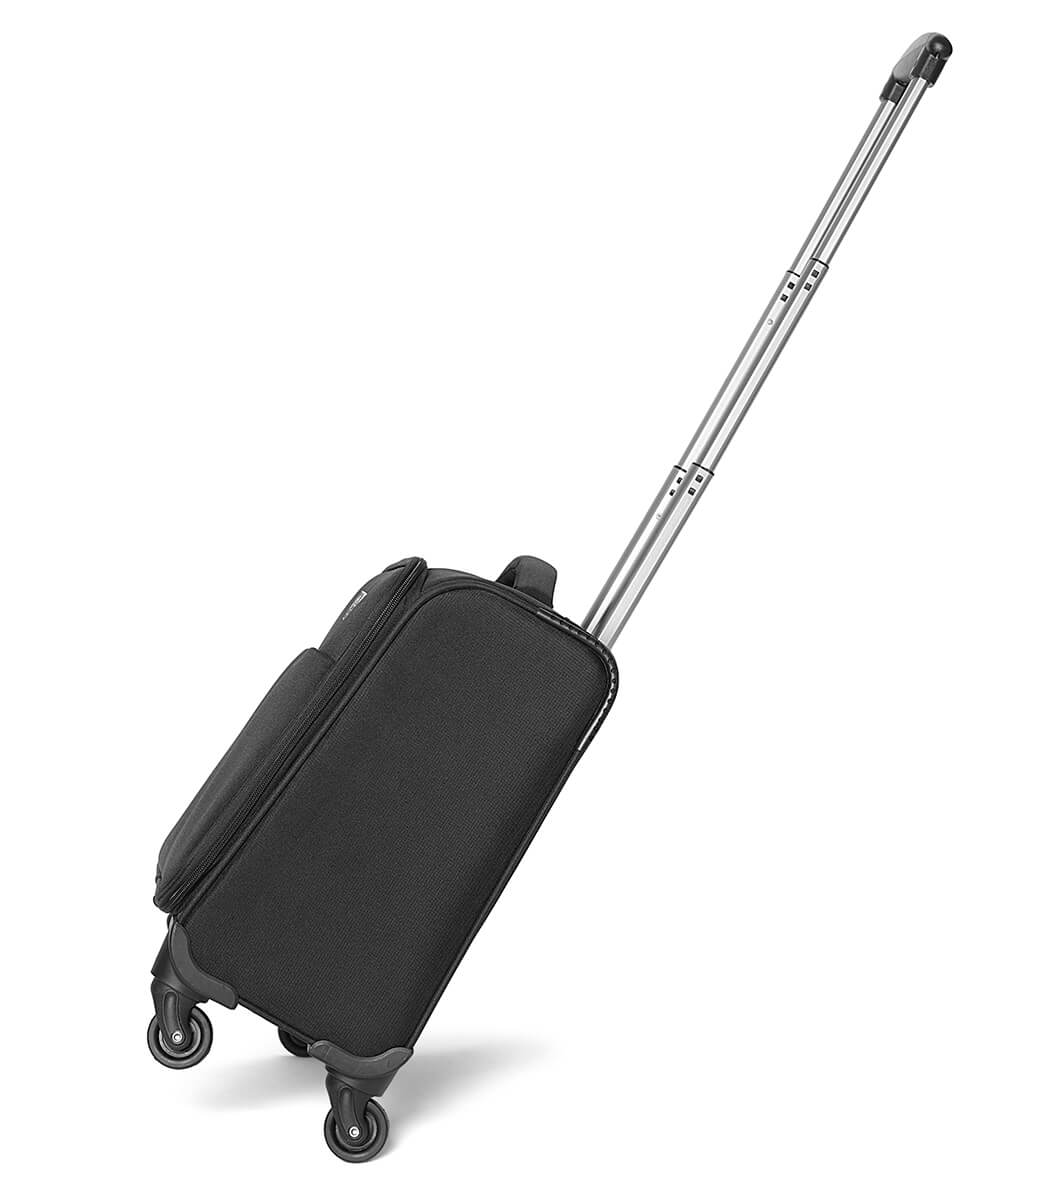  the Trooper 24 cm Soft Trolley Cabin Laptop Bag  your perfect travel companion This sleek and durable bag is equipped with a 3 dial lock for added security